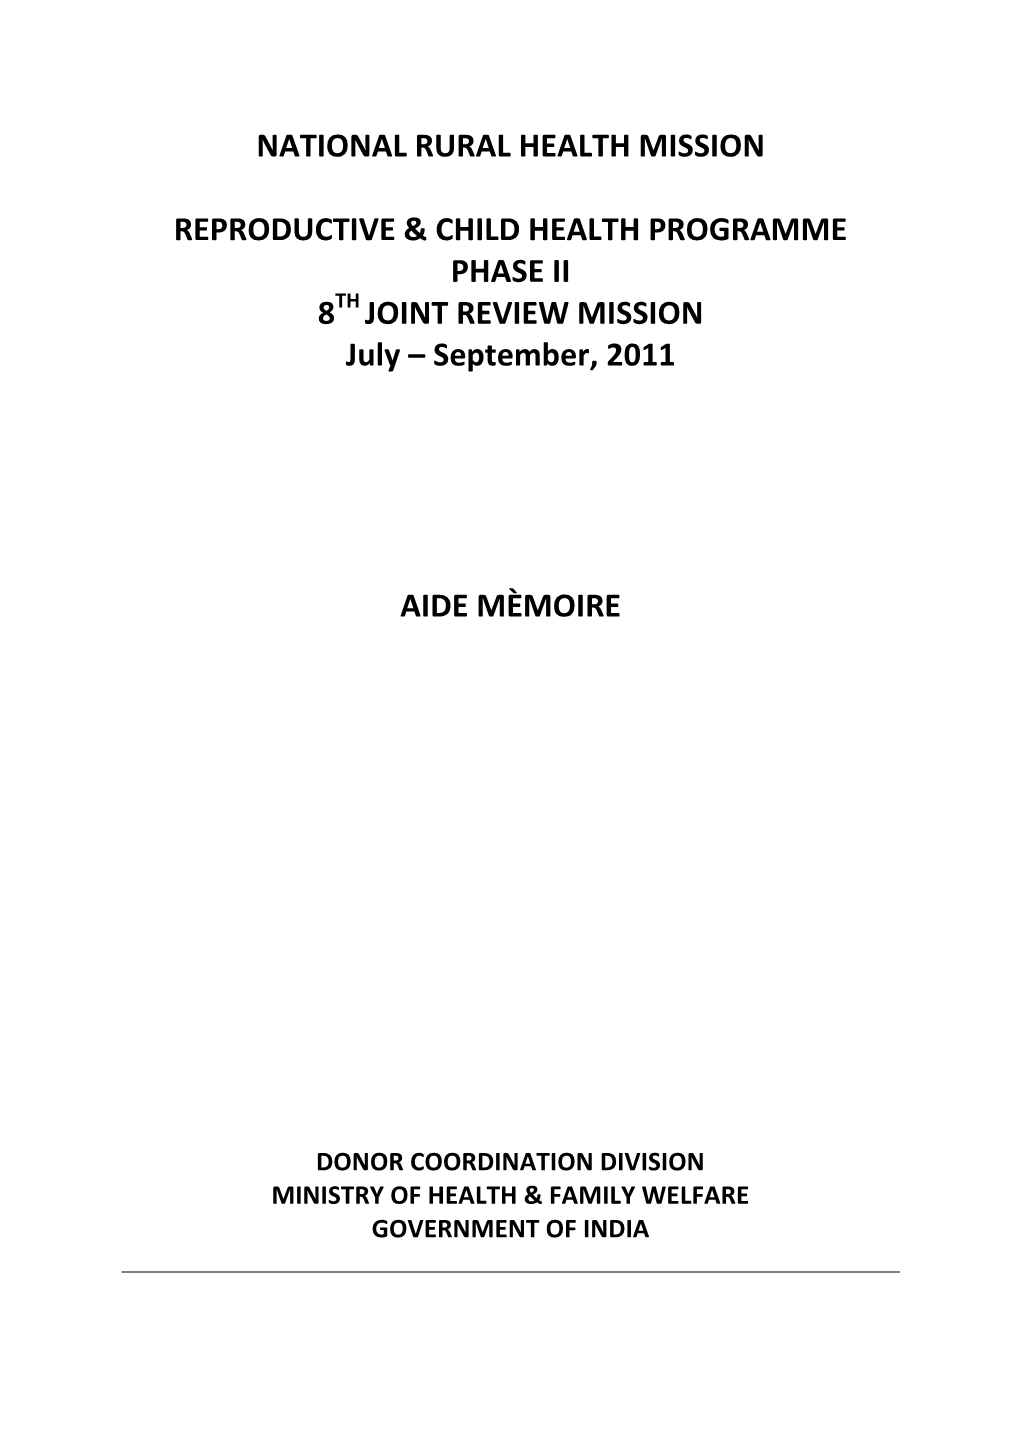 Programme Design for the RCH 2 PIP Review